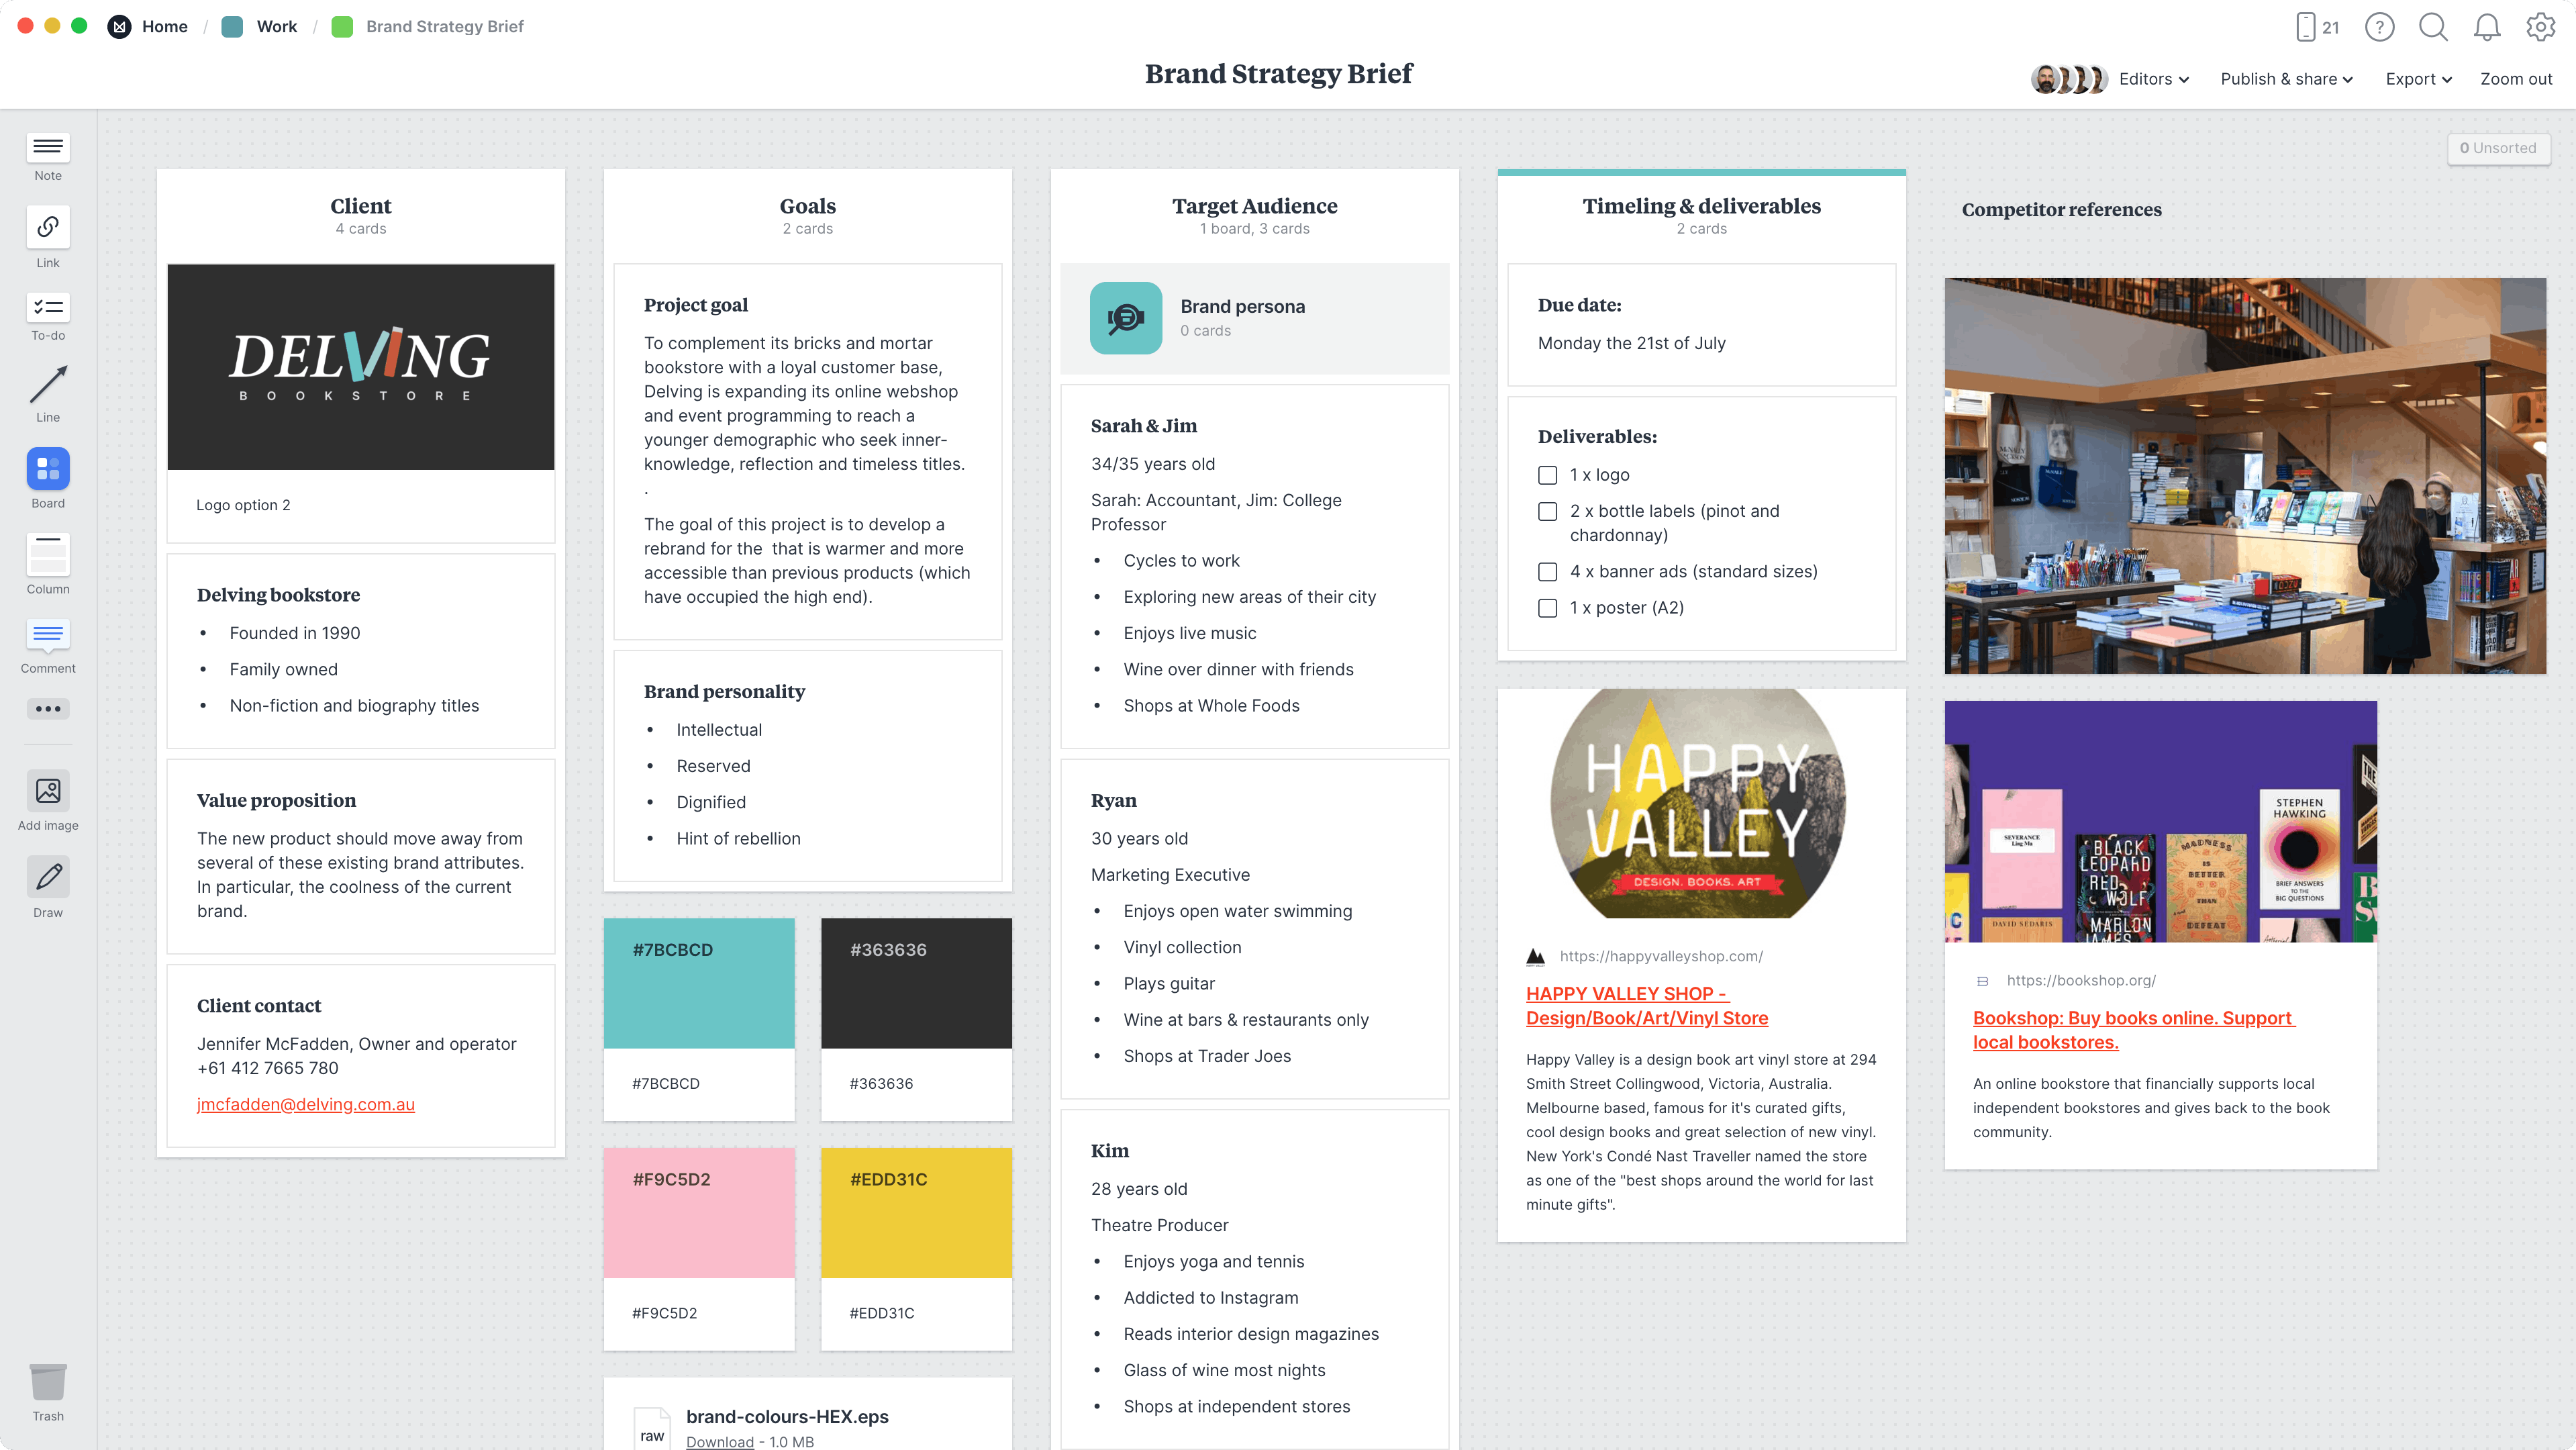 Brand Strategy Brief Template, within the Milanote app